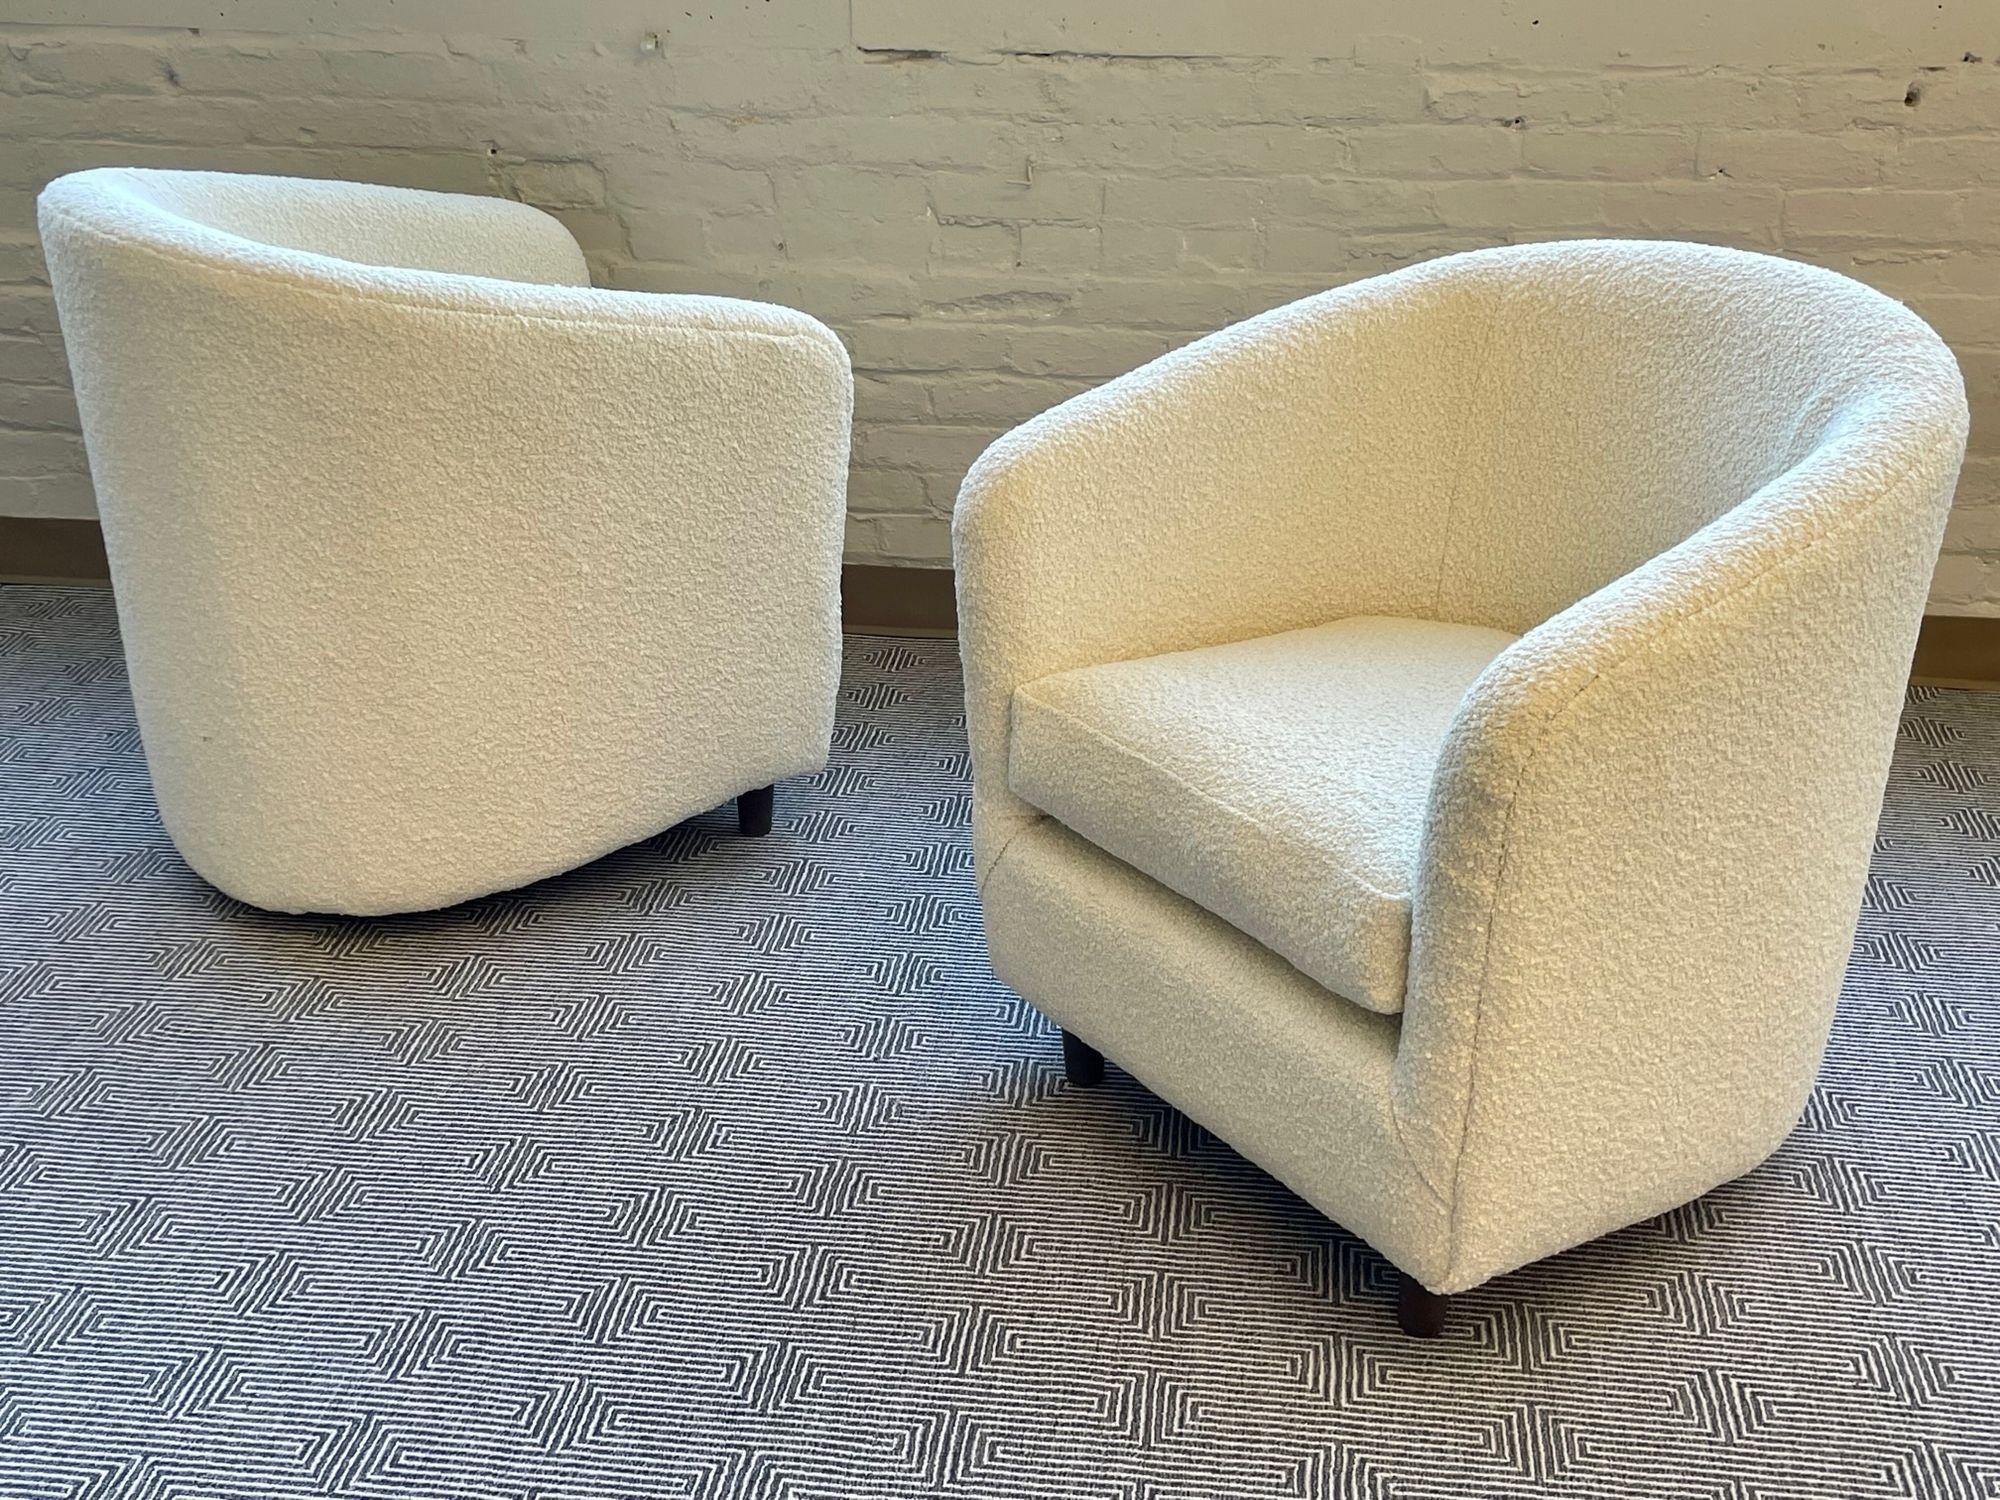 Pair of Mid-Century Modern Tub Chairs, Boucle, American Designer, 2000s
 
Mid-Century lounge chairs by an unkown American designer from the earlier 2000s. Newly upholstered in a thick, nubby, white boucle. 
 
Other American designers of the period